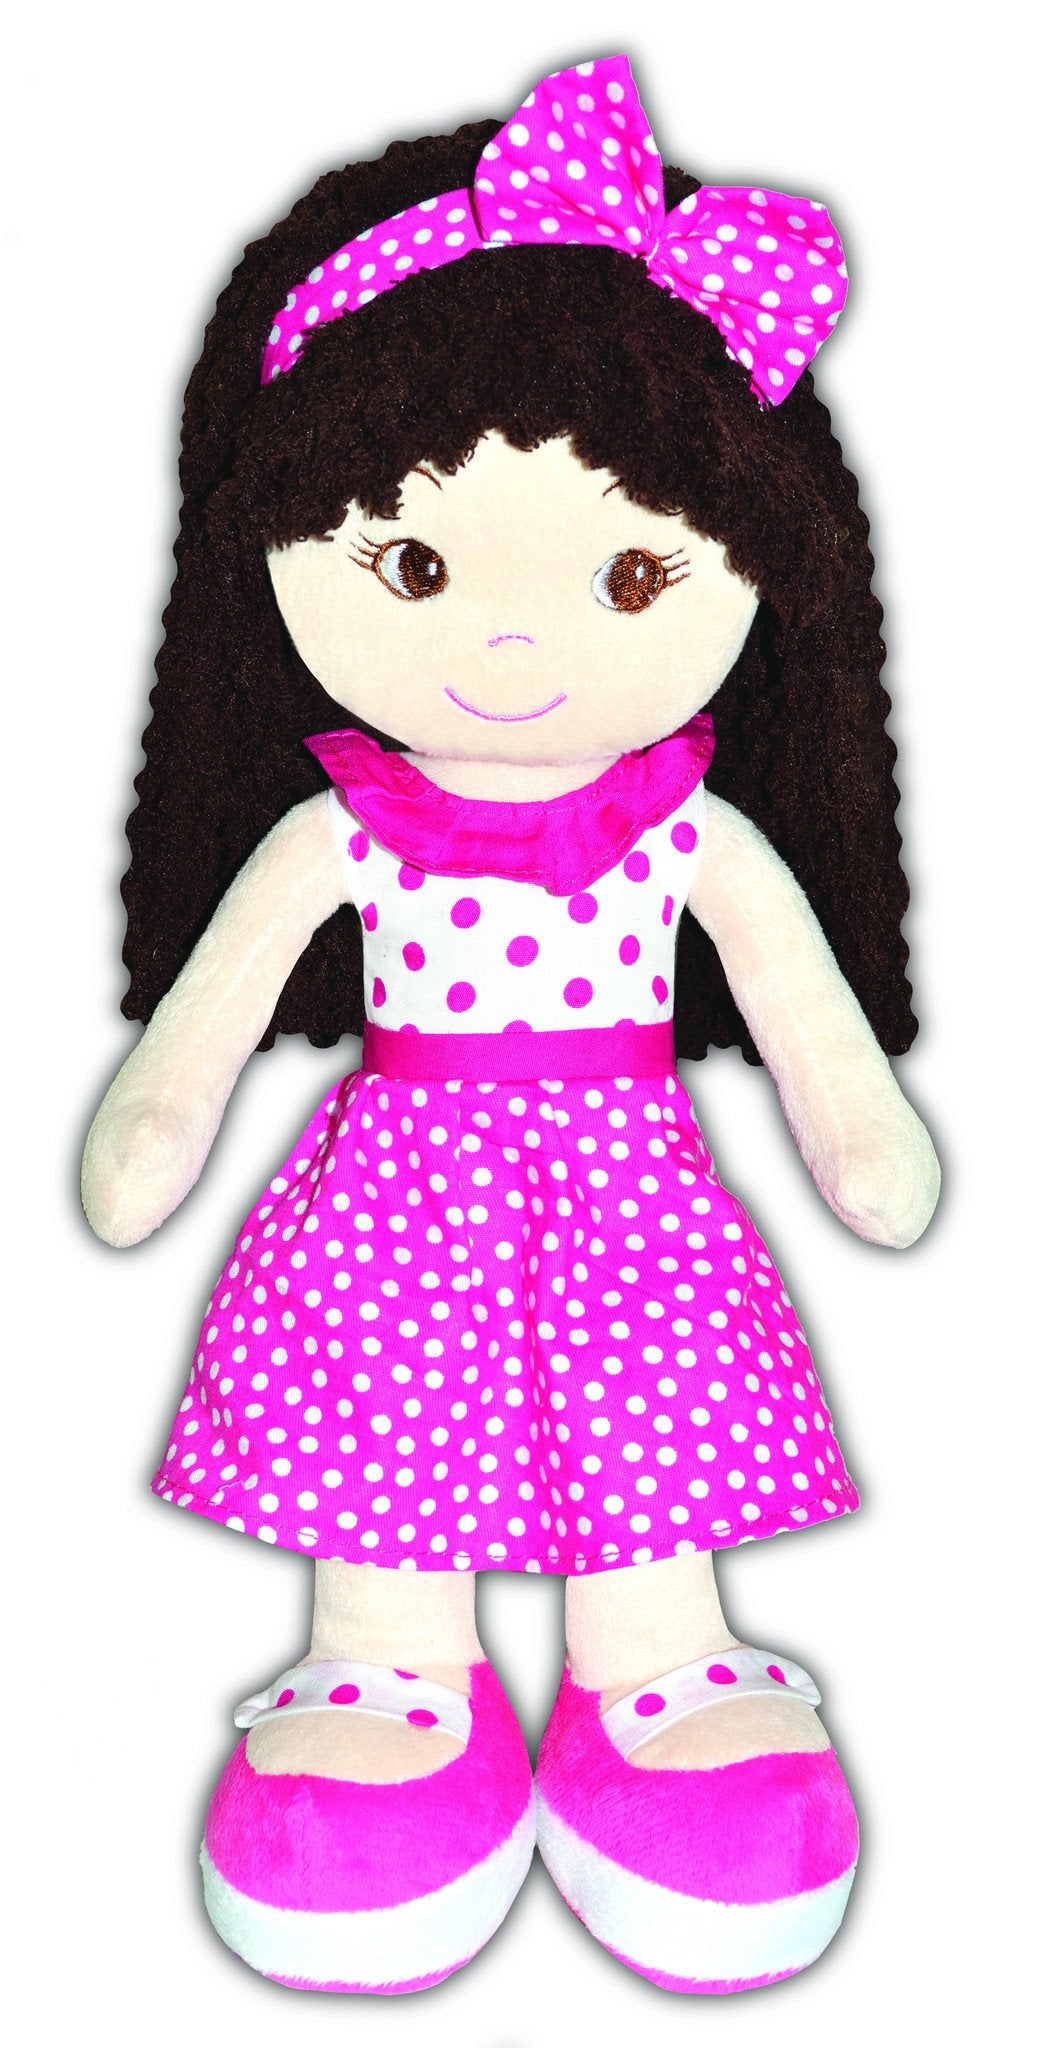 Jessica Pretty in Pink Baby Rag Doll